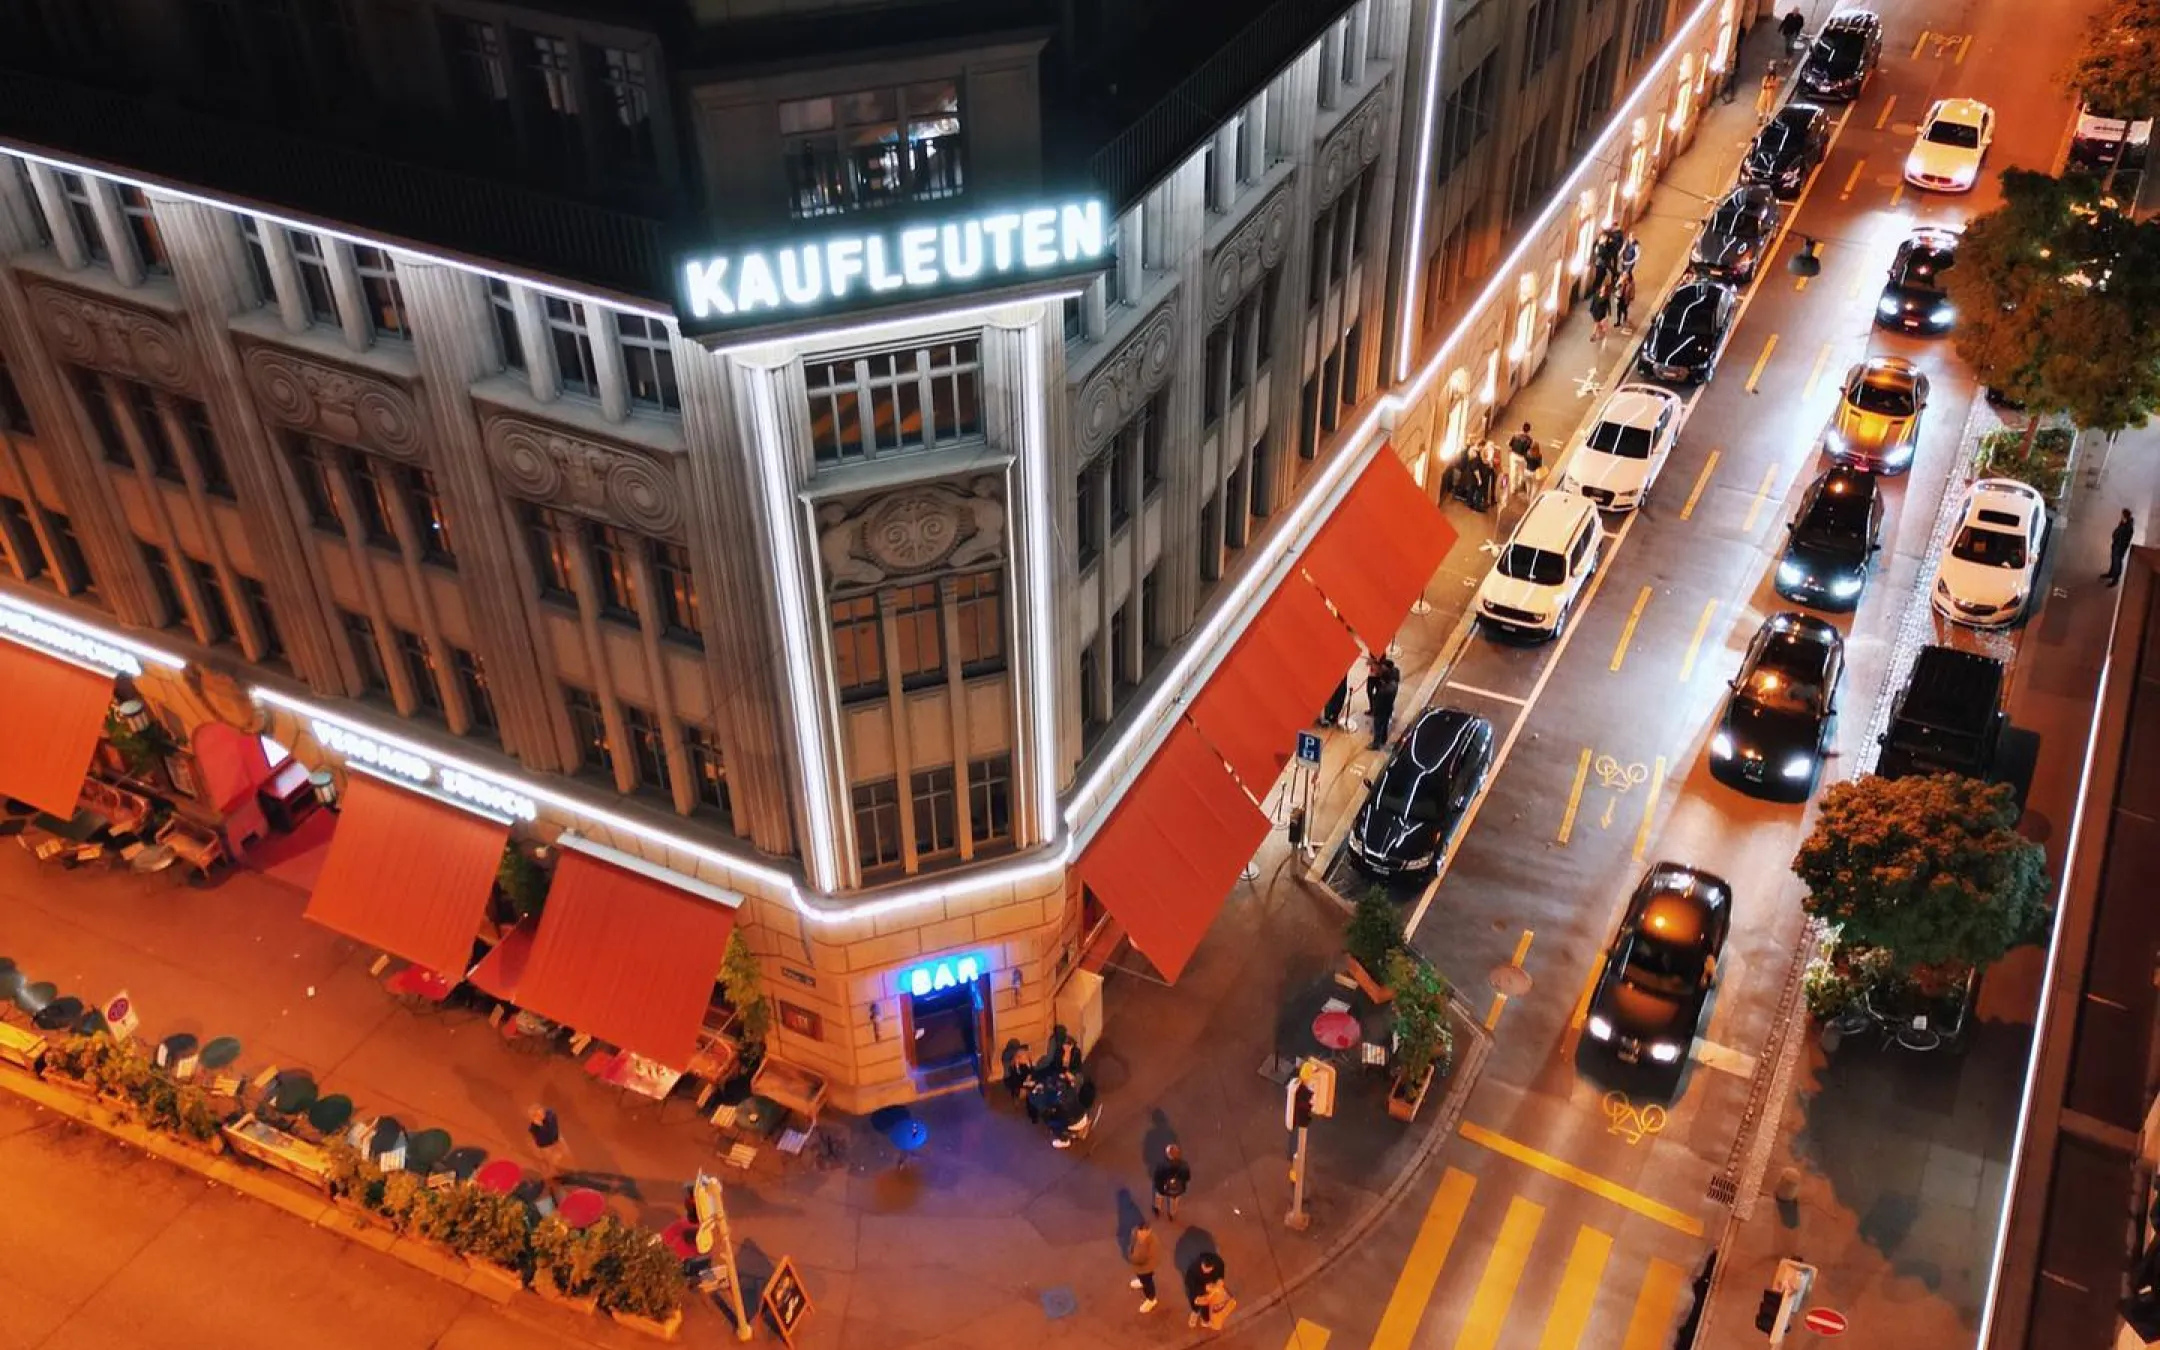 Kaufleuten building from the air at night